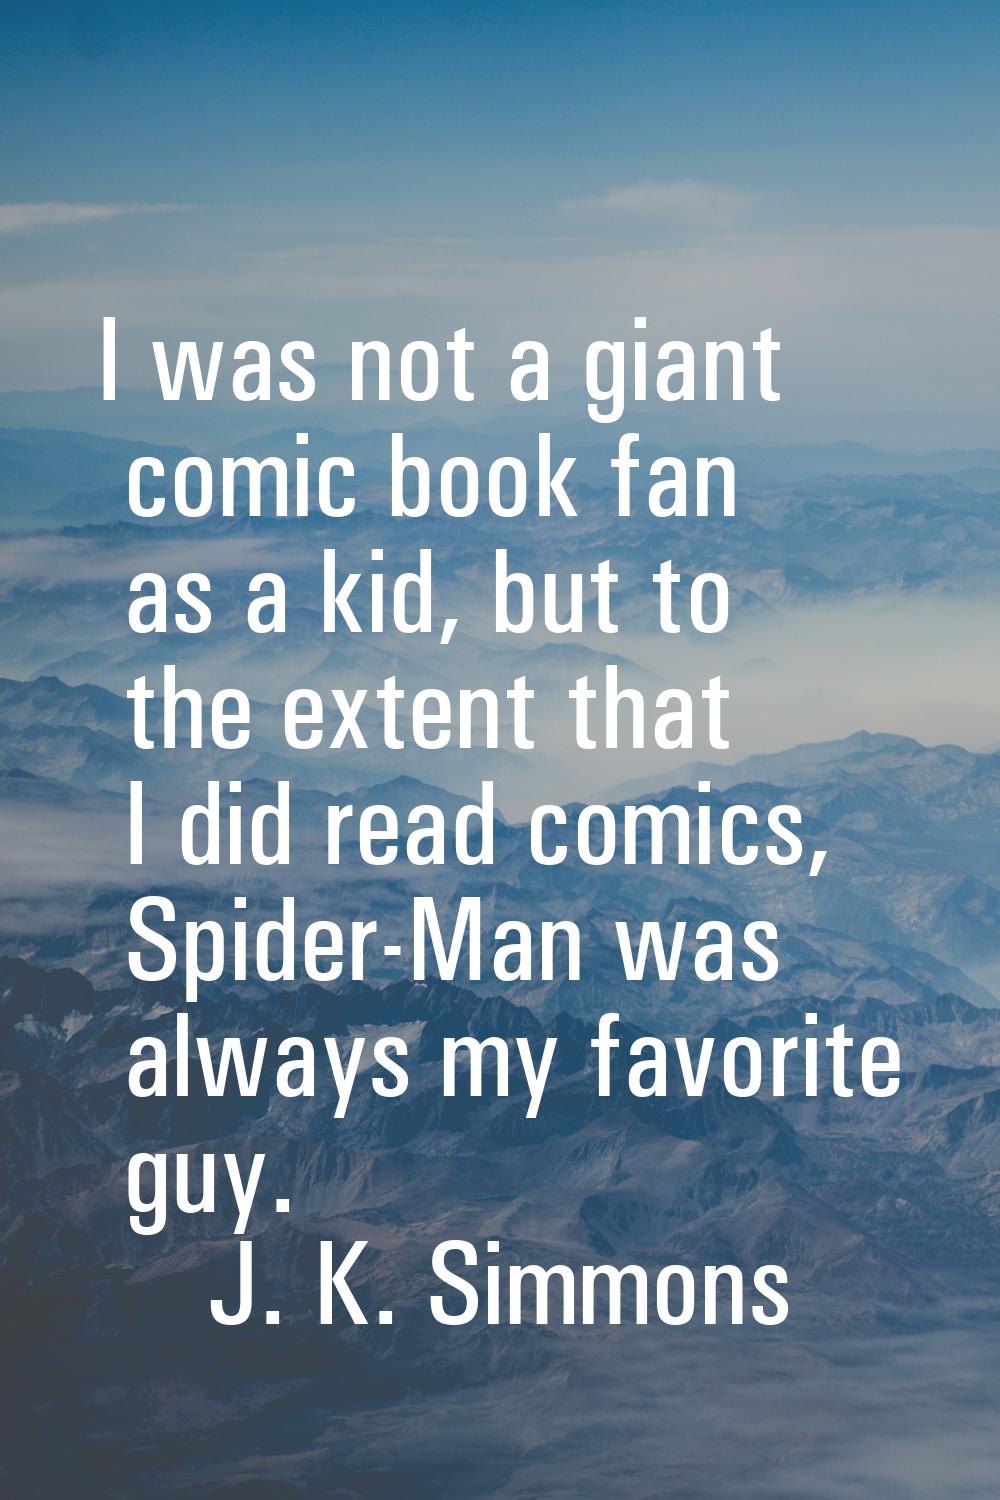 I was not a giant comic book fan as a kid, but to the extent that I did read comics, Spider-Man was